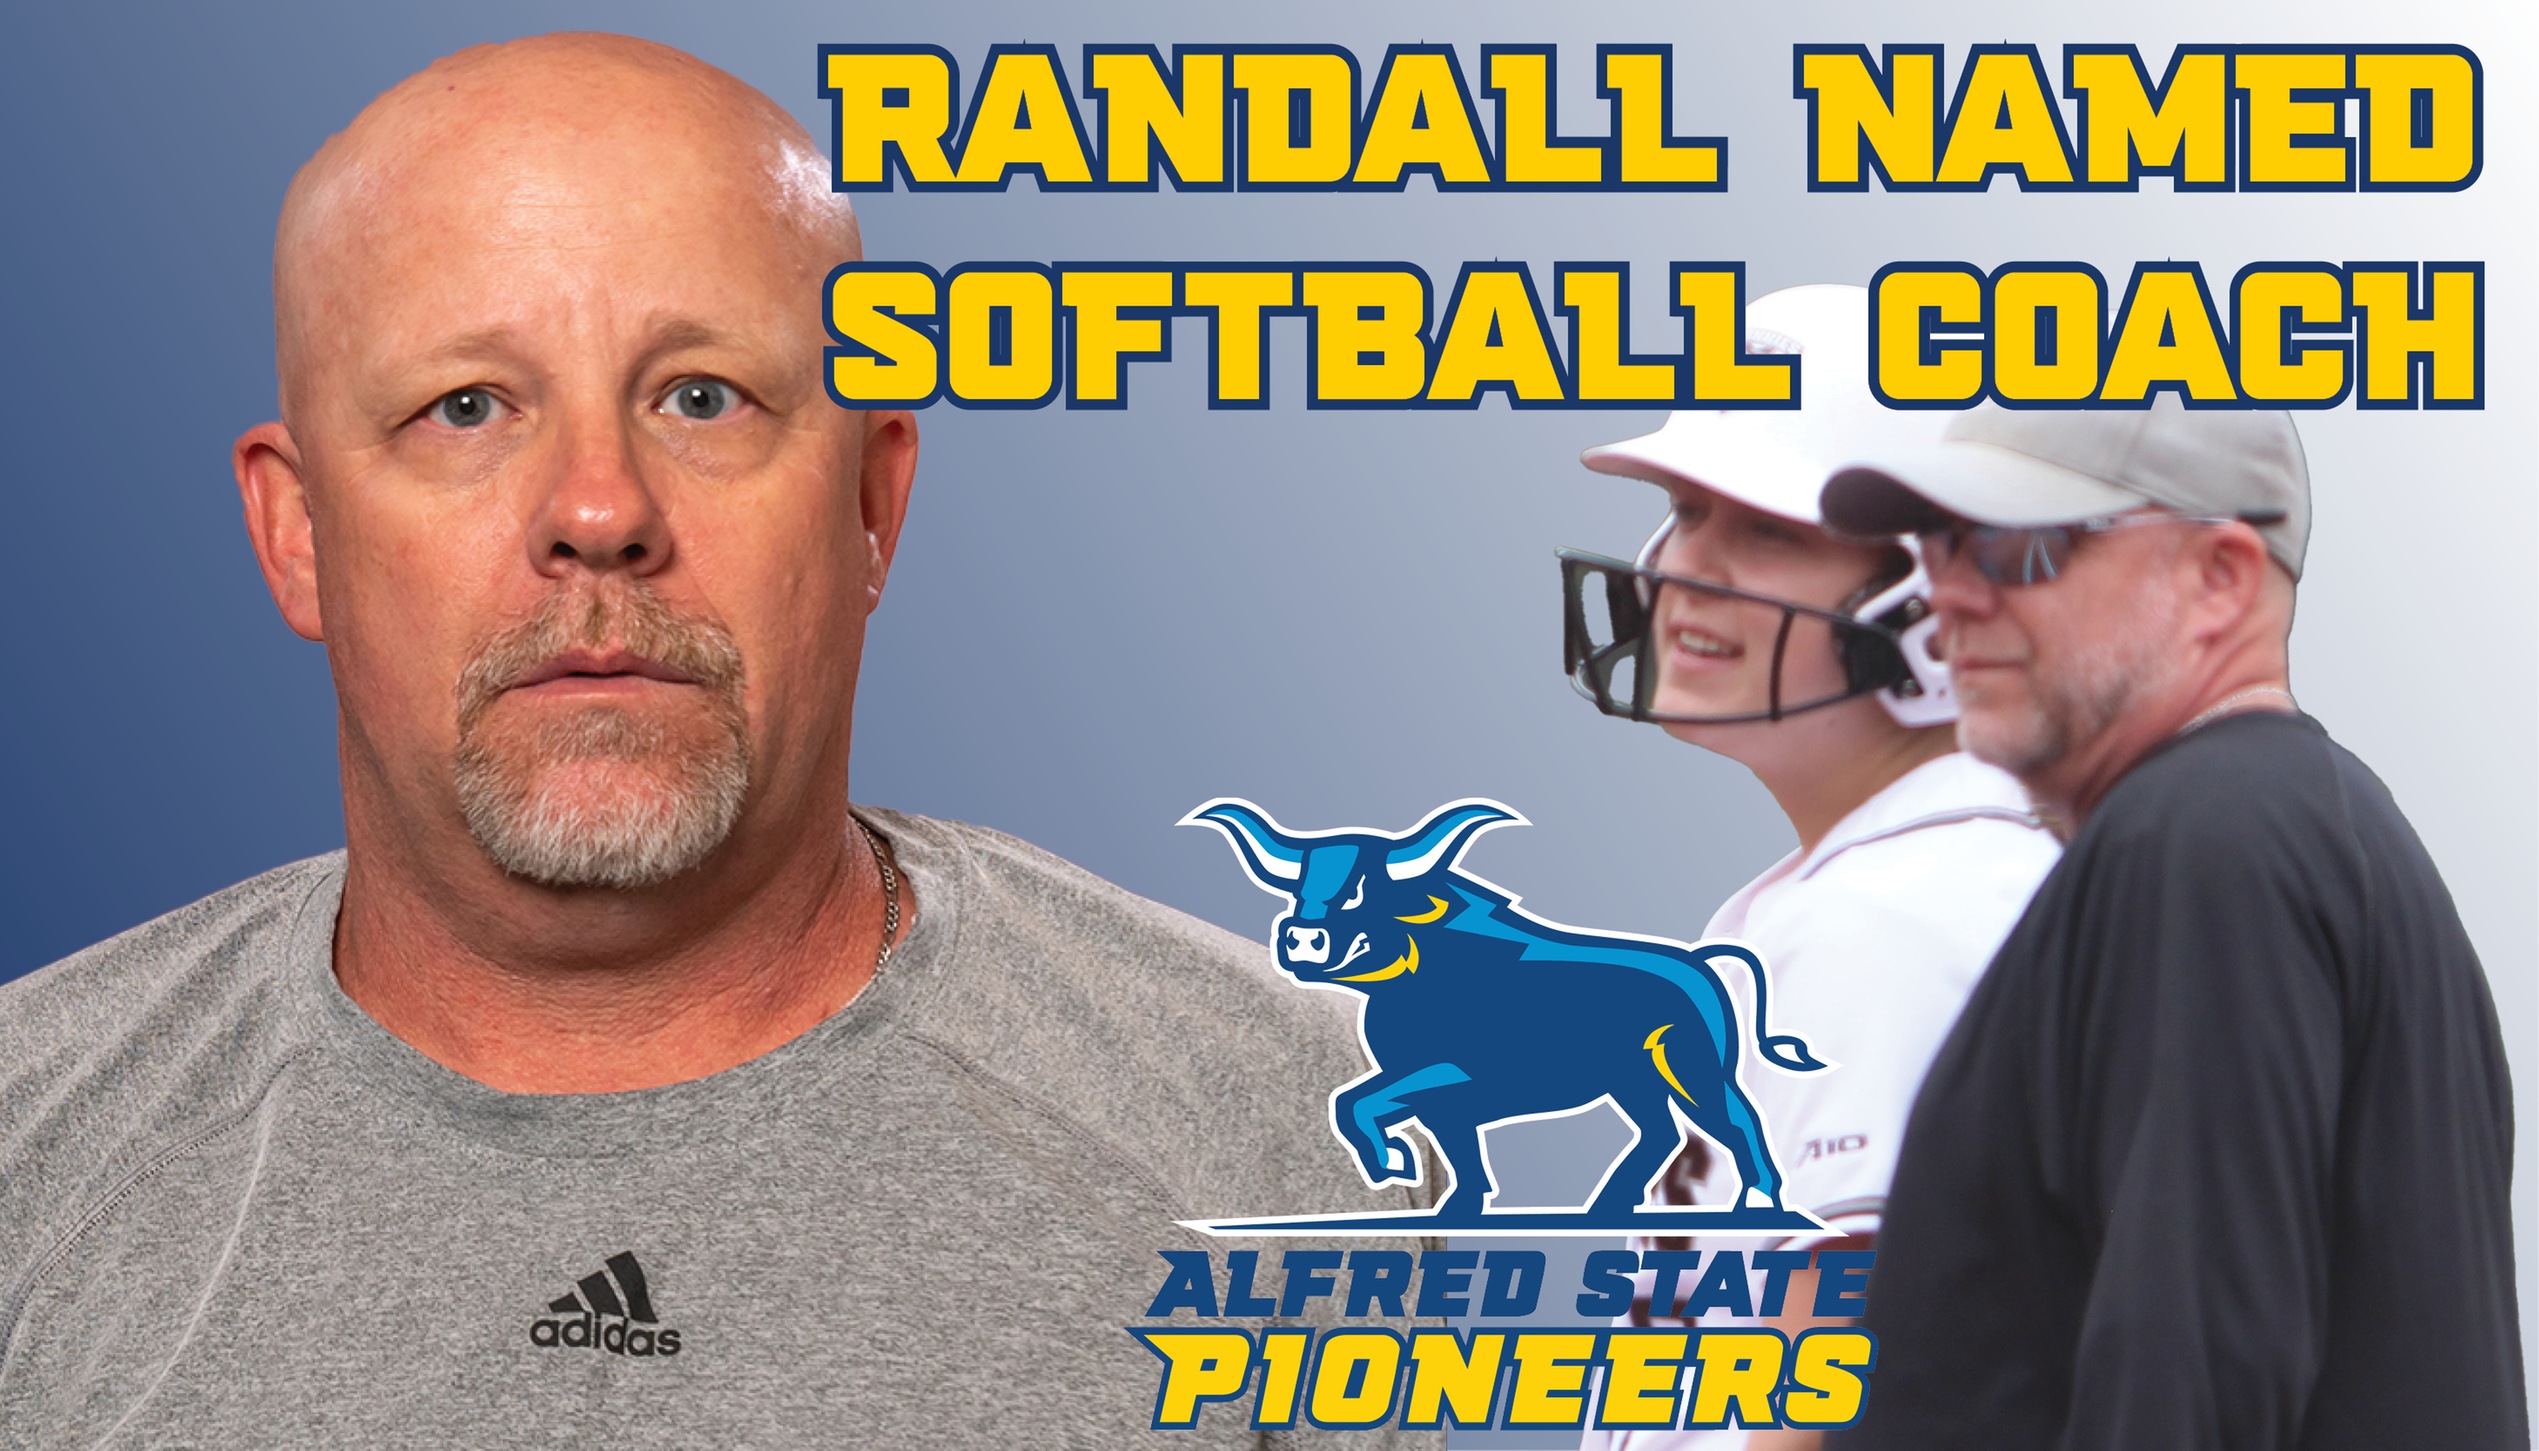 Todd Randall named softball coach

Pictured is a head shot of Randall and a picture of Randall with a student-athlete.